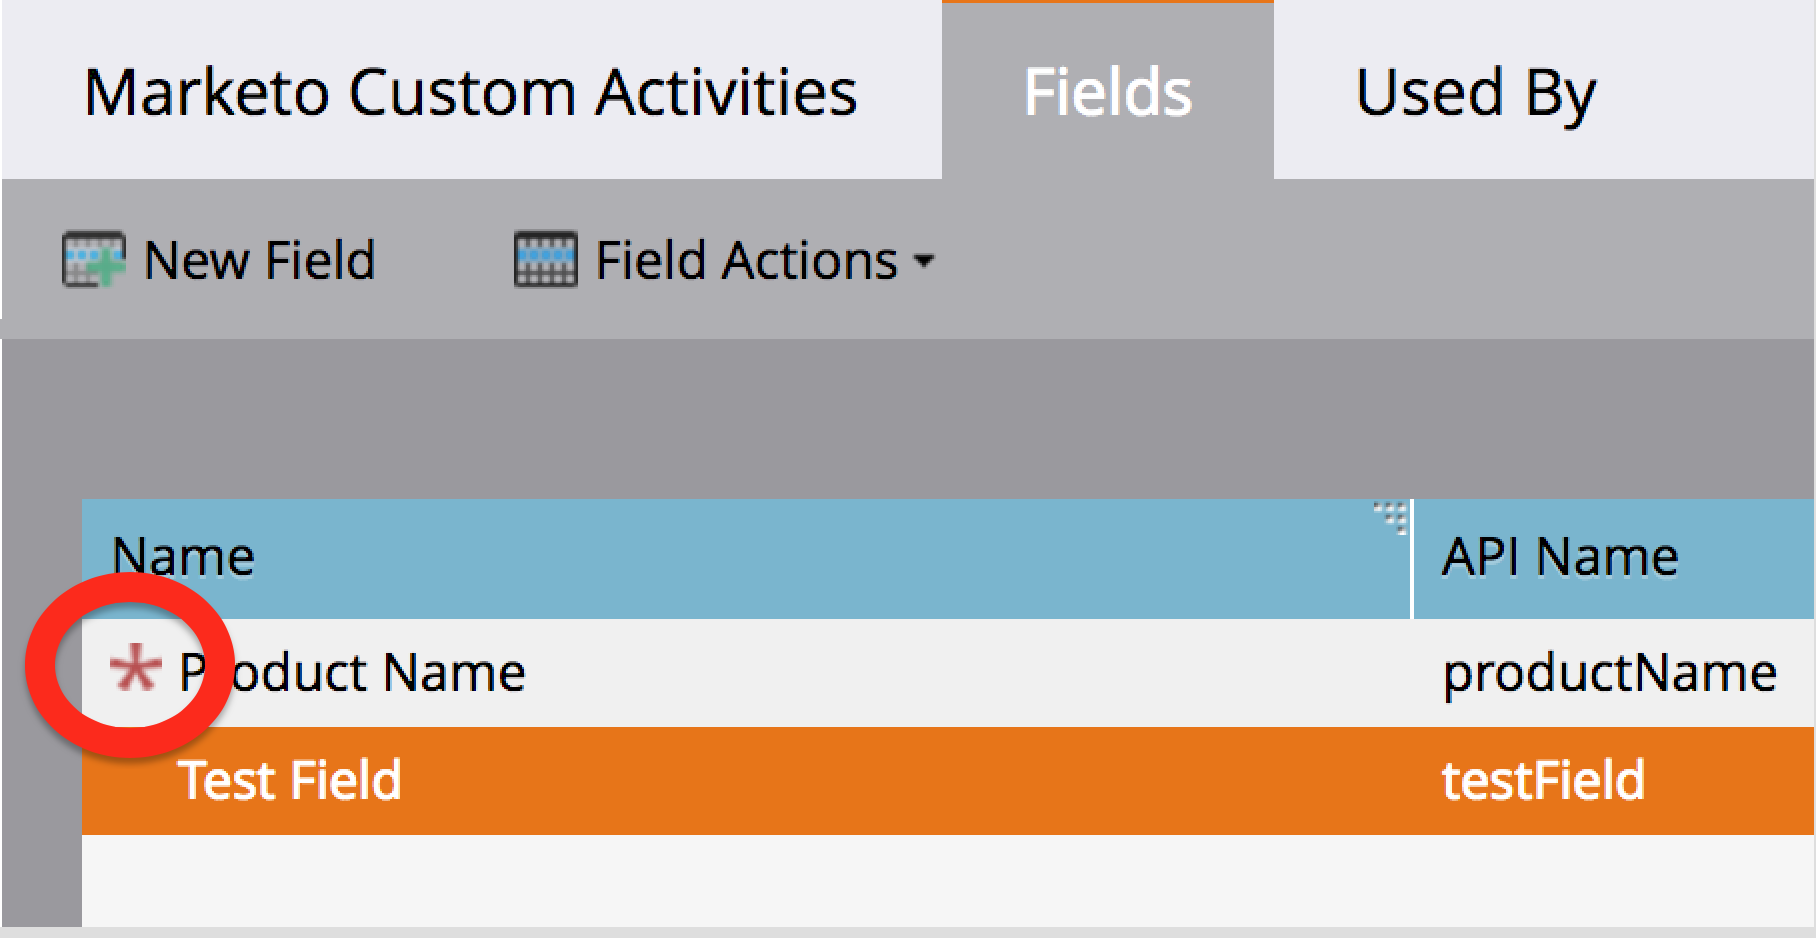 A screenshot of the Fields tab inside of the Marketo Custom Activities page.